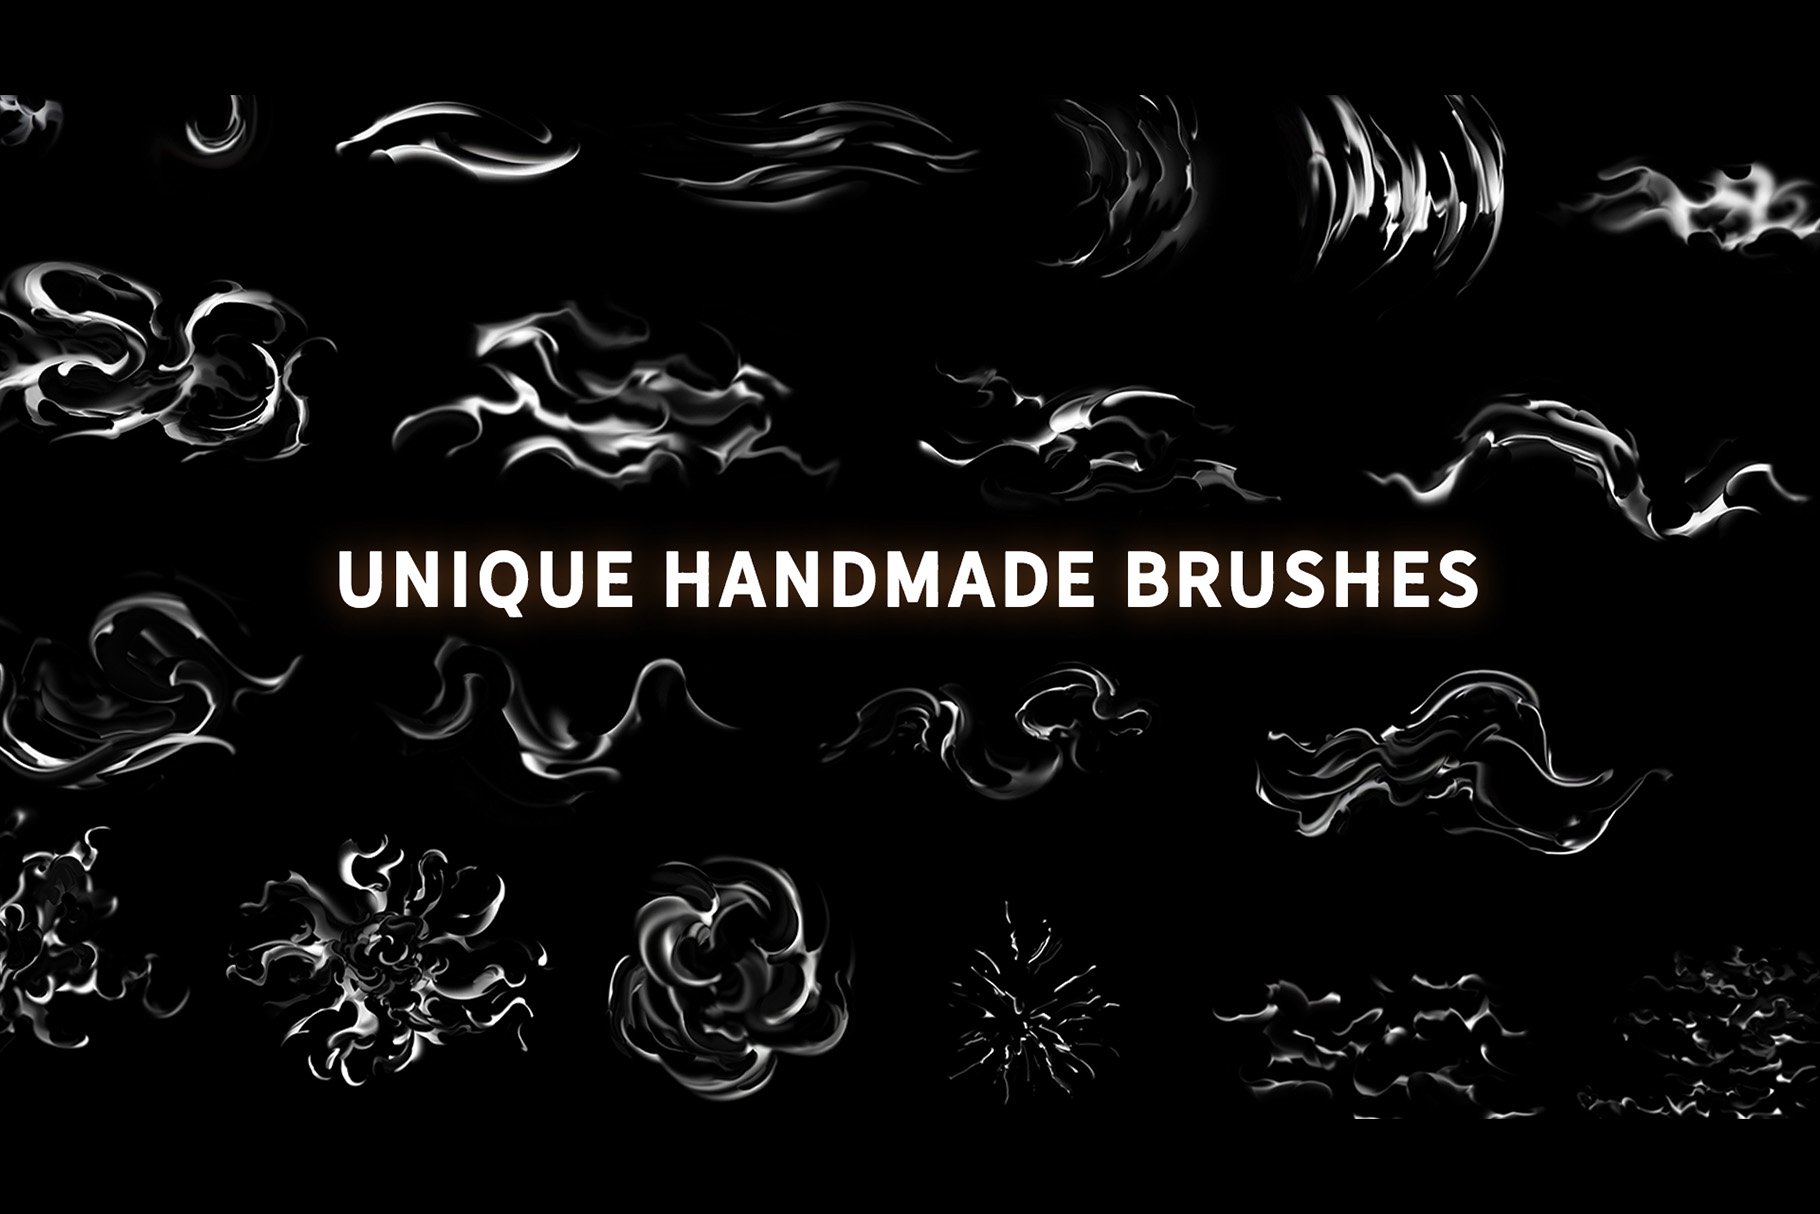 Magic FX Brushes Vol. 1preview image.